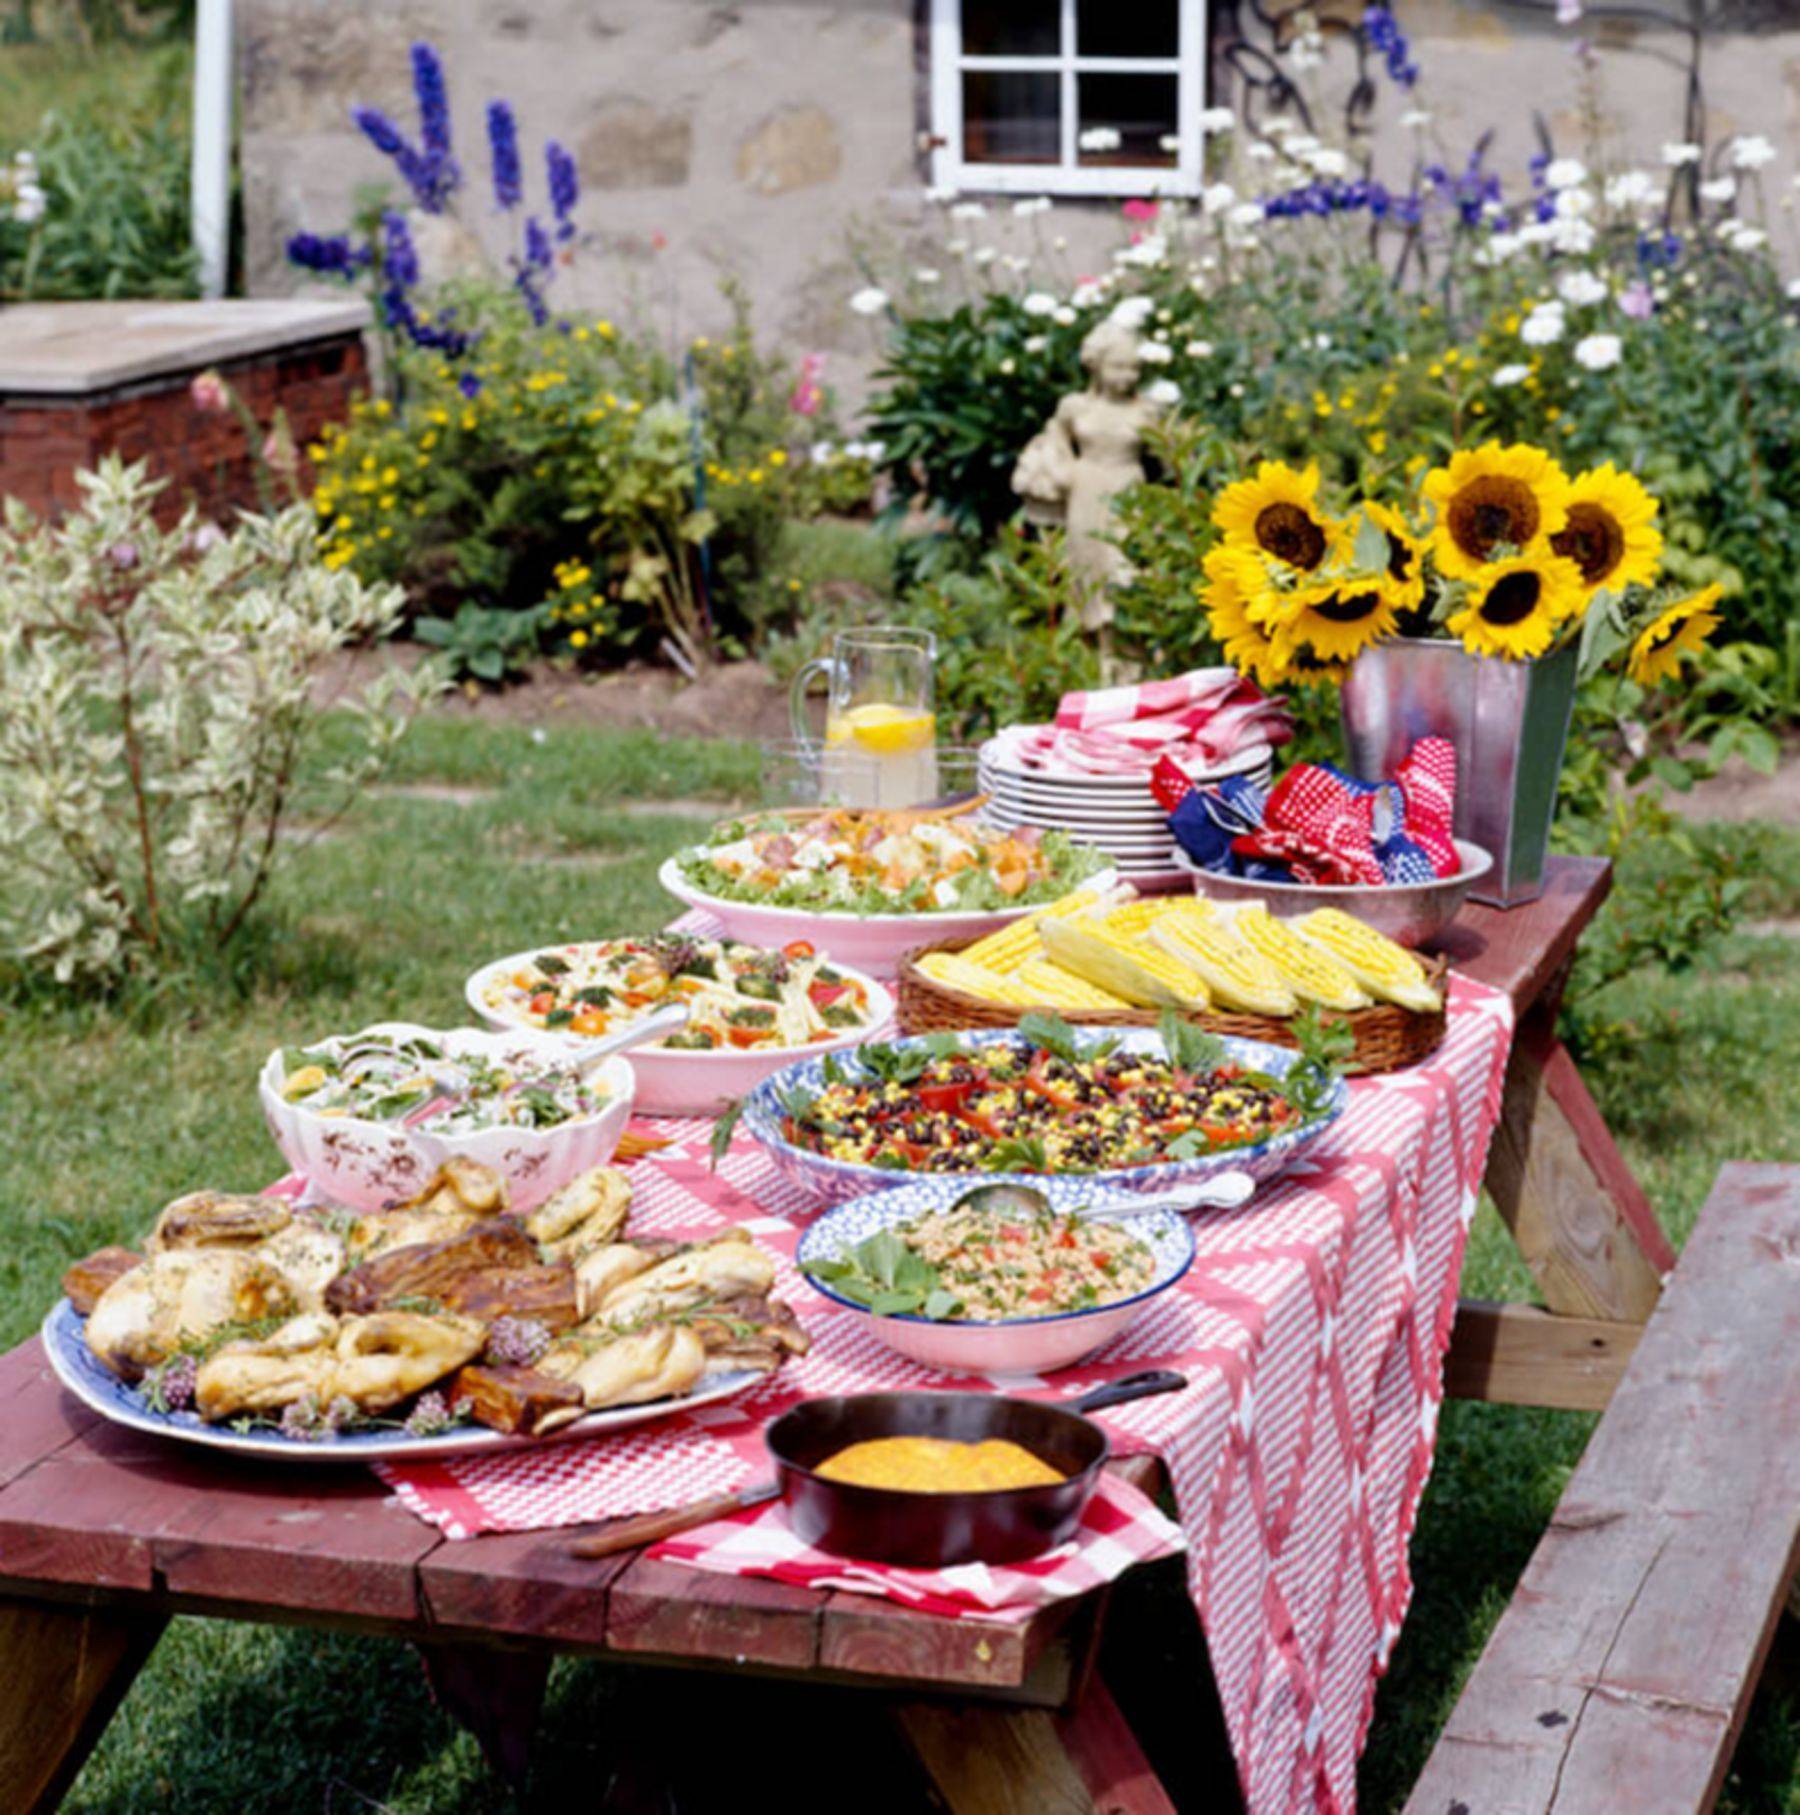 18 Summer Garden Party Ideas Foods You Should Look Sharonsable 8652